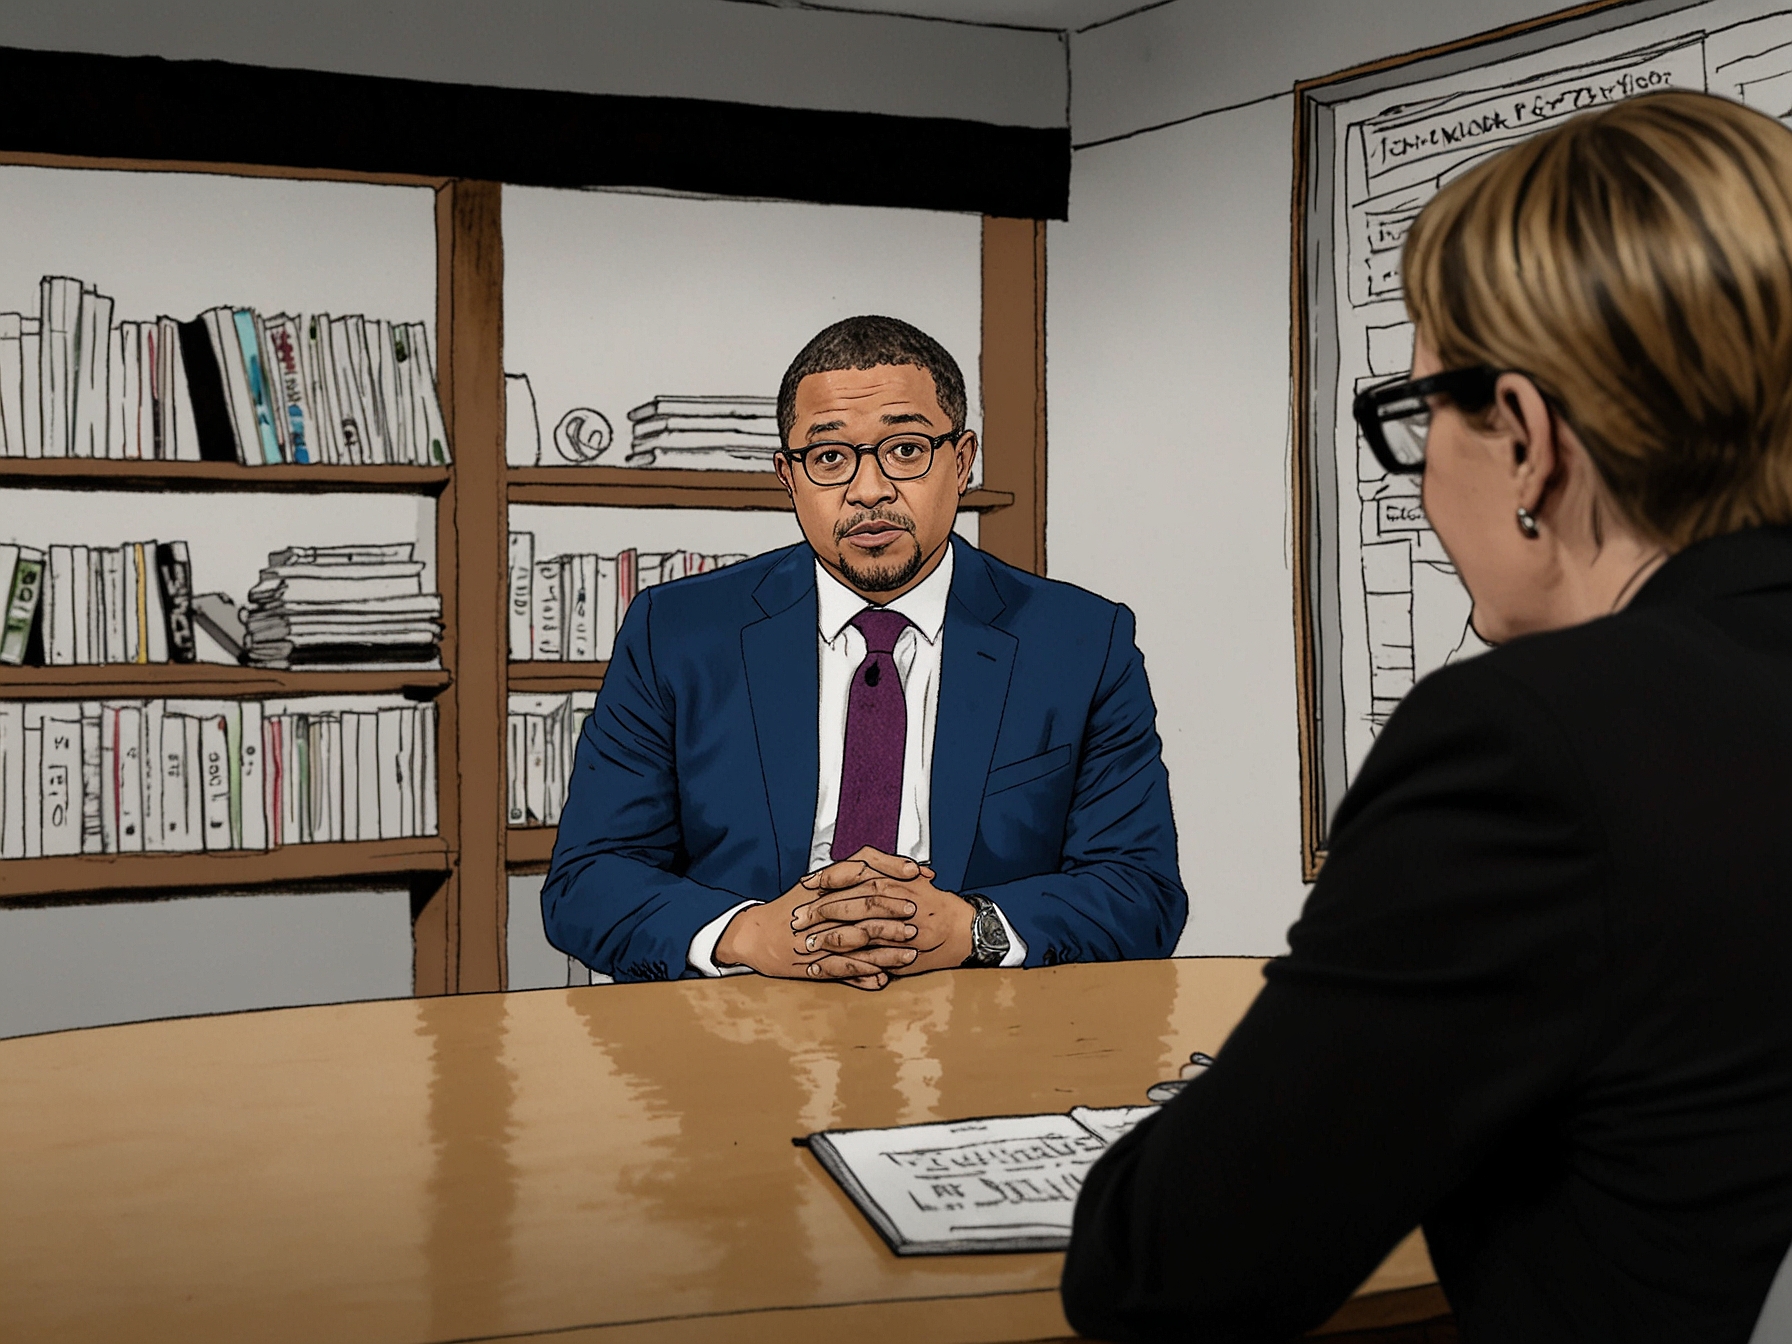 James Cleverly appearing visibly surprised on live television as he is shown a clip of a Tory aide criticizing the Rwanda immigration plan during an interview on 'The Laura Kuenssberg Show.'